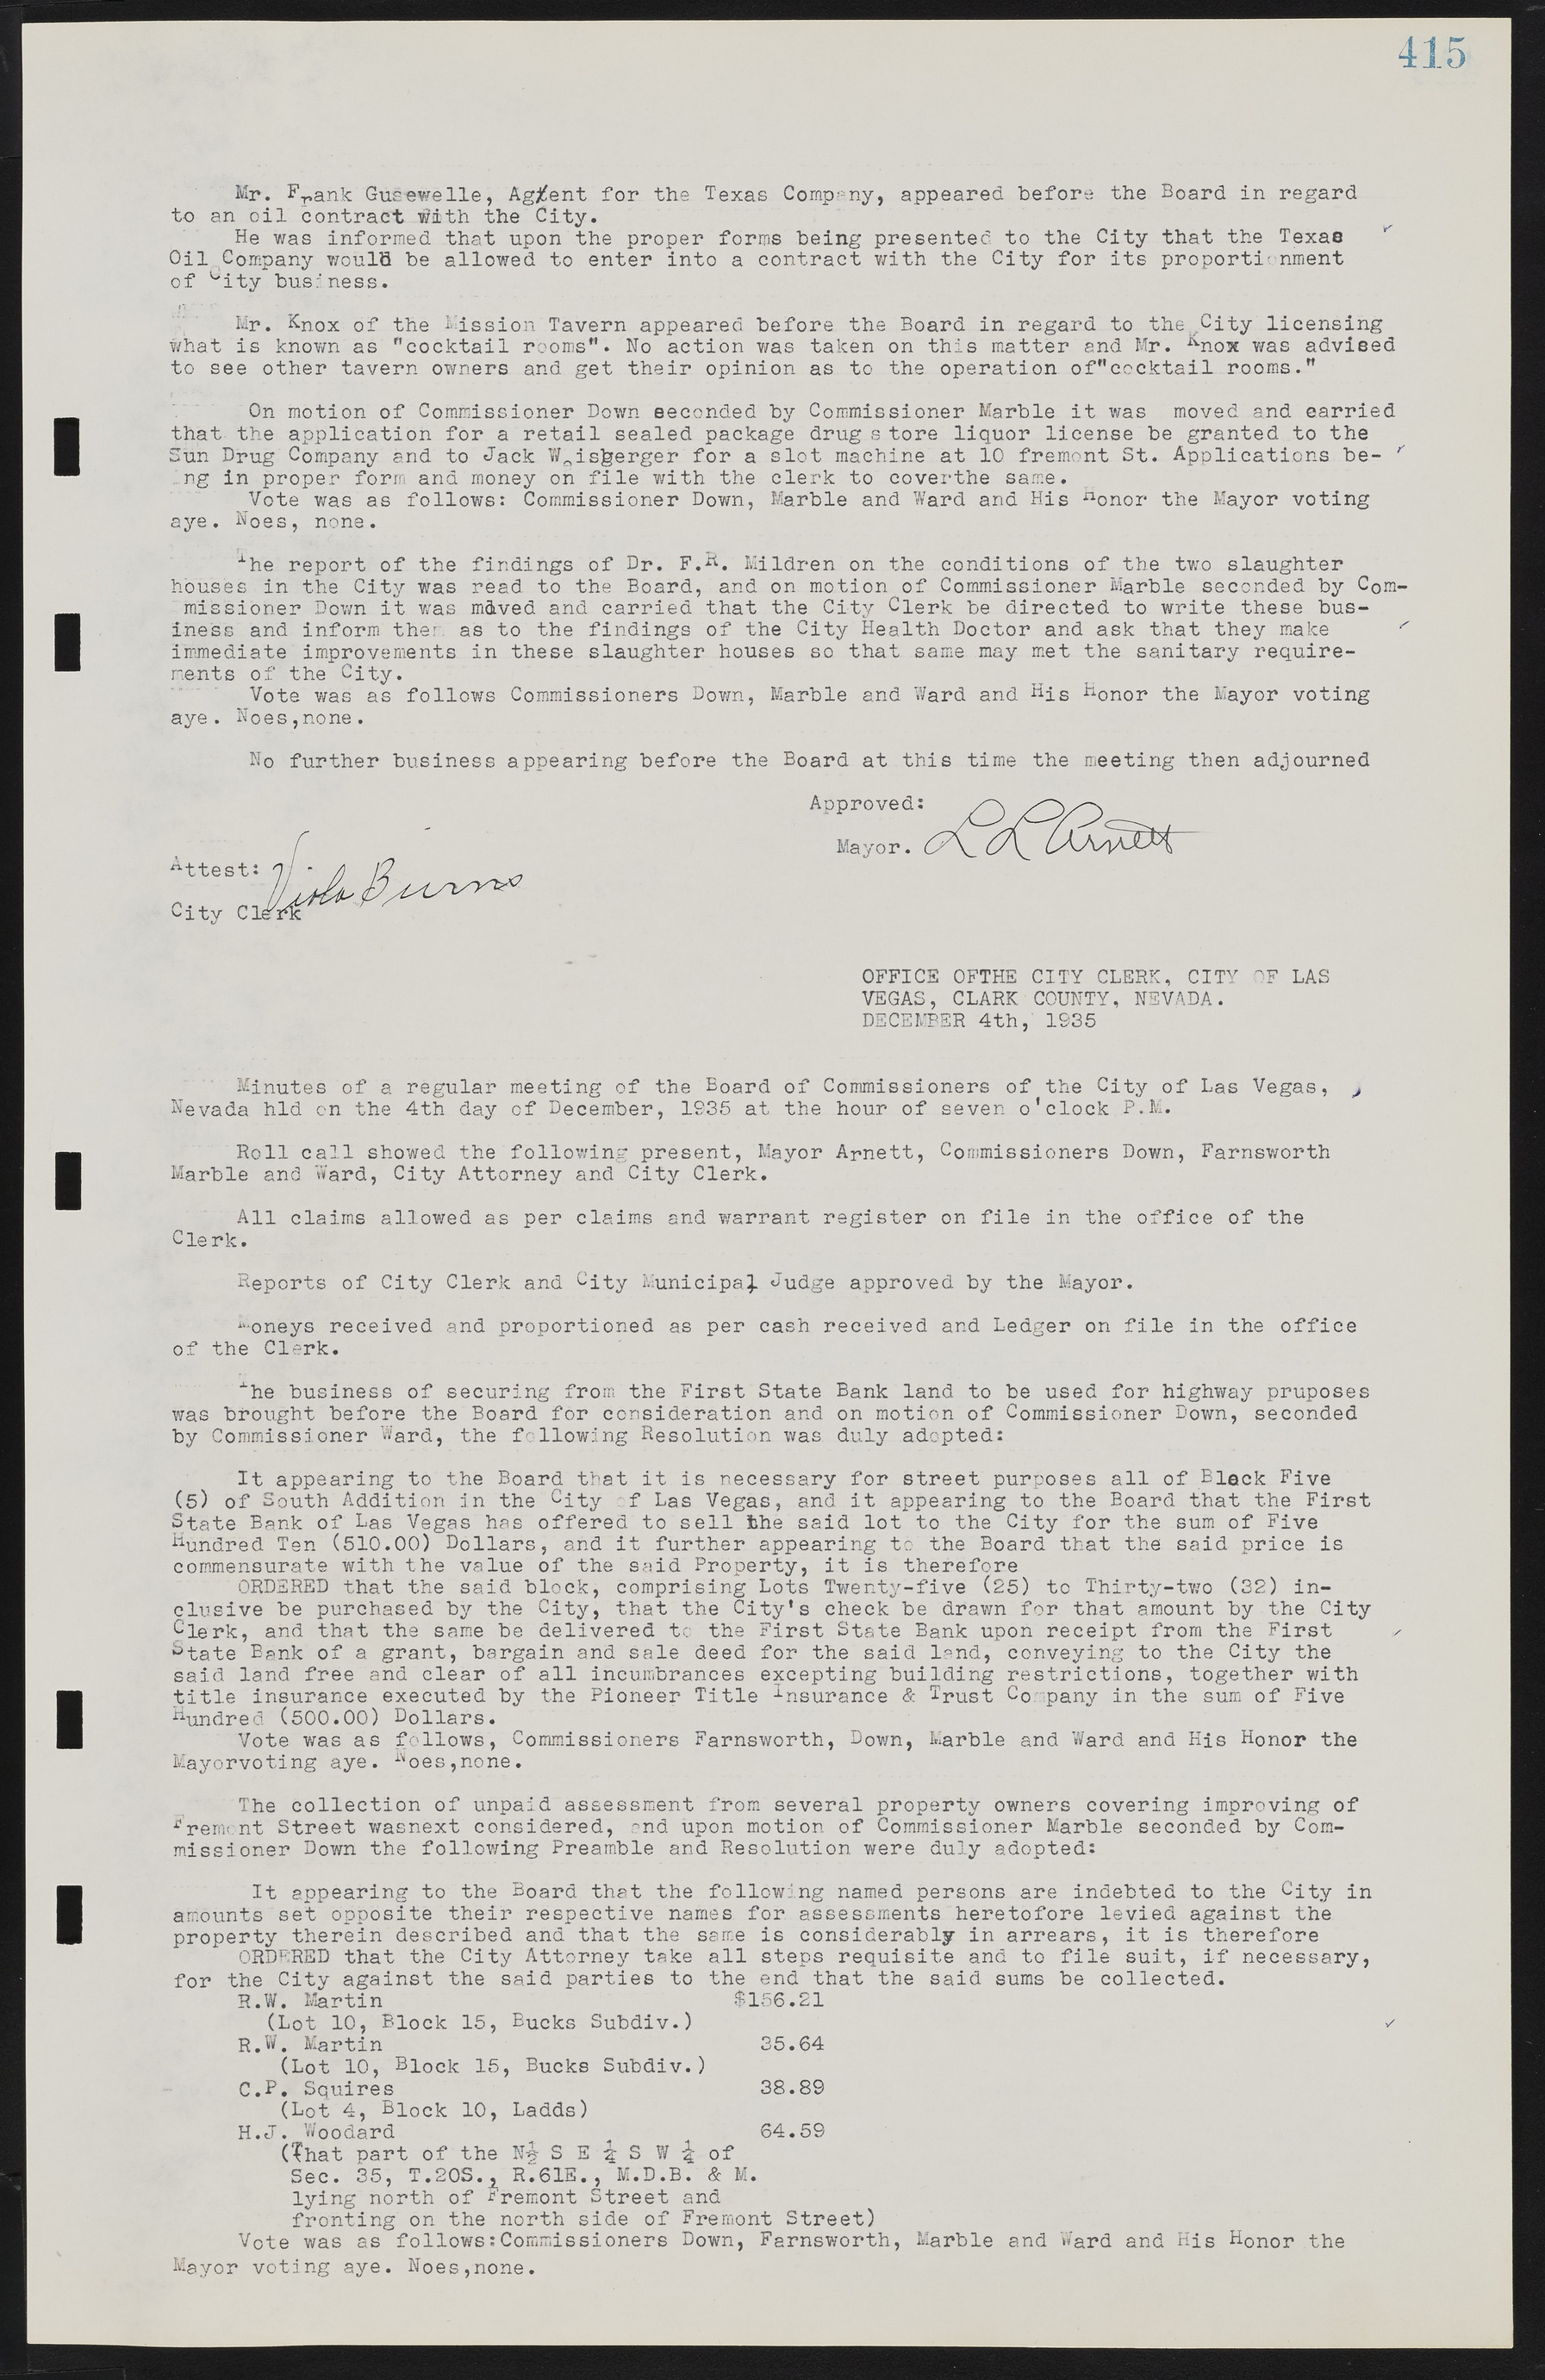 Las Vegas City Commission Minutes, May 14, 1929 to February 11, 1937, lvc000003-422